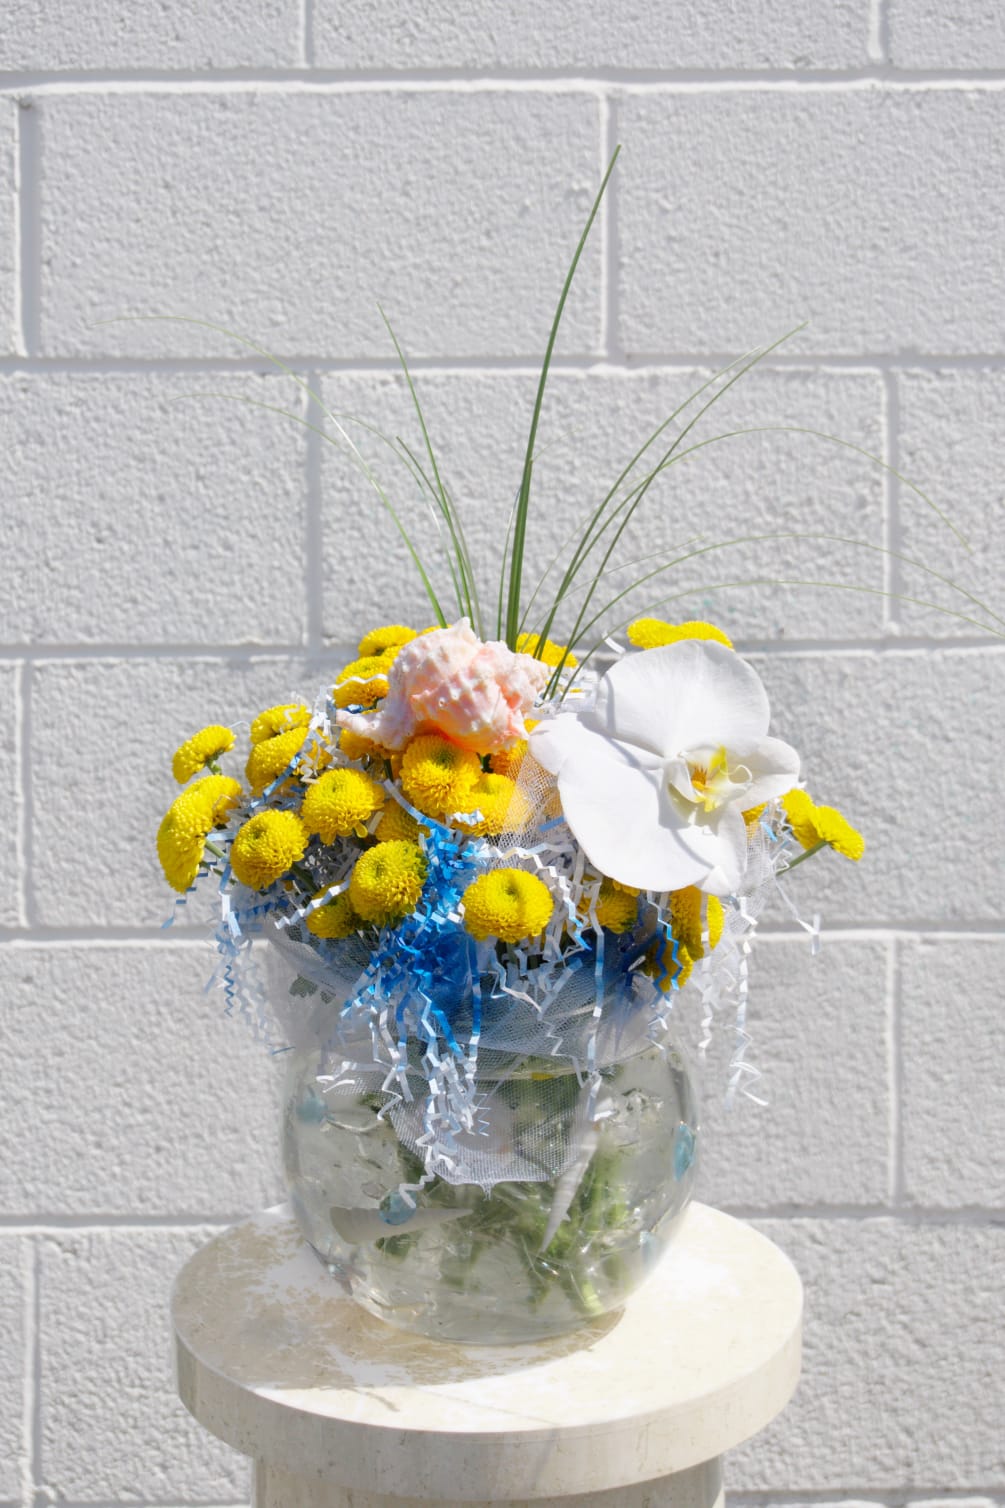 Oceanic design including yellow buttons, roses, orchids, sea holly, sea shells and